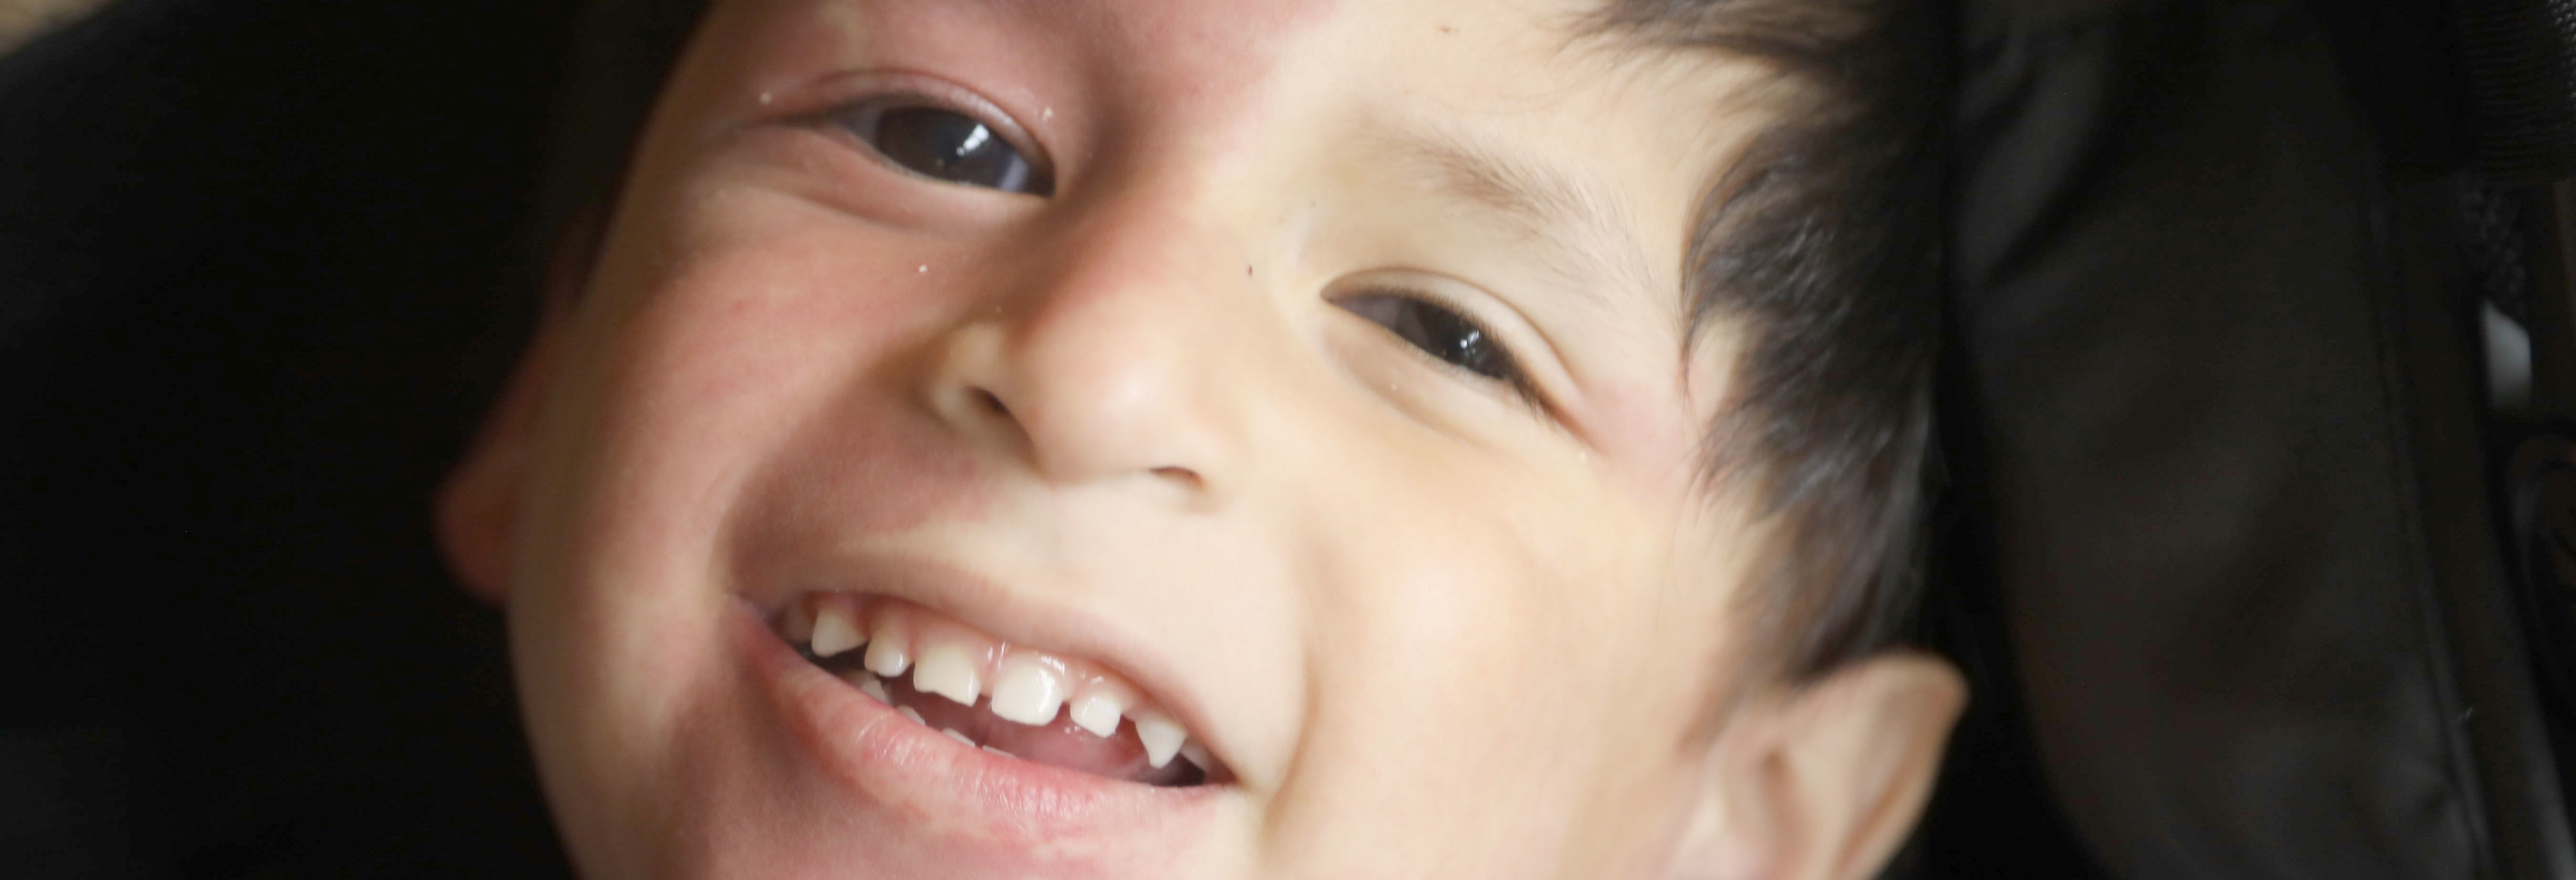 Close up of little boy smiling at the camera with a facial birthmark